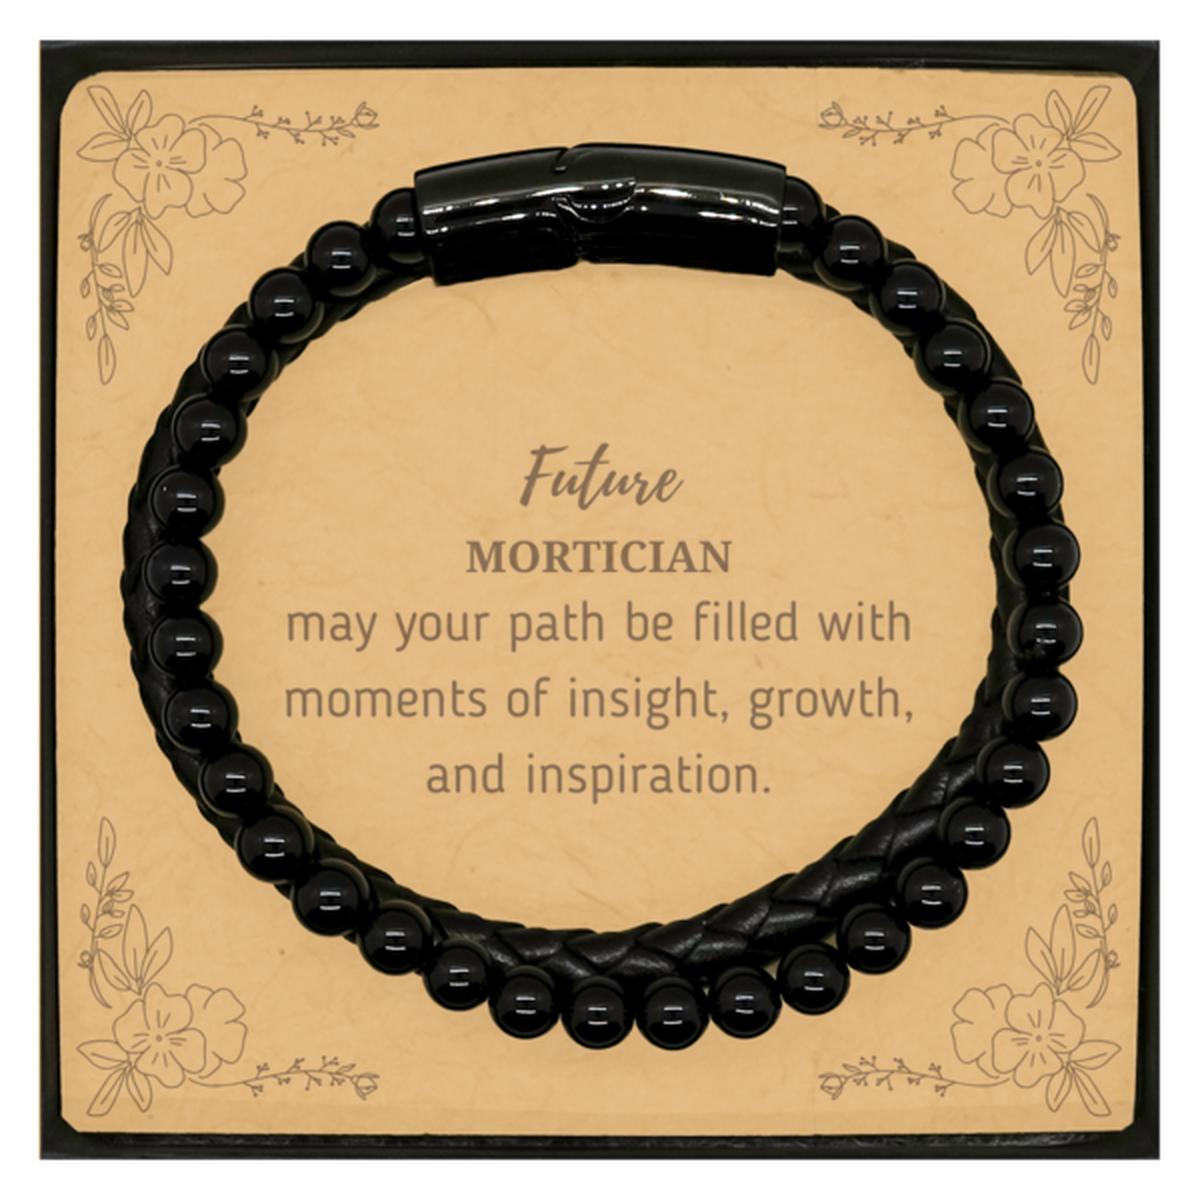 Future Mortician Gifts, May your path be filled with moments of insight, Graduation Gifts for New Mortician, Christmas Unique Stone Leather Bracelets For Men, Women, Friends